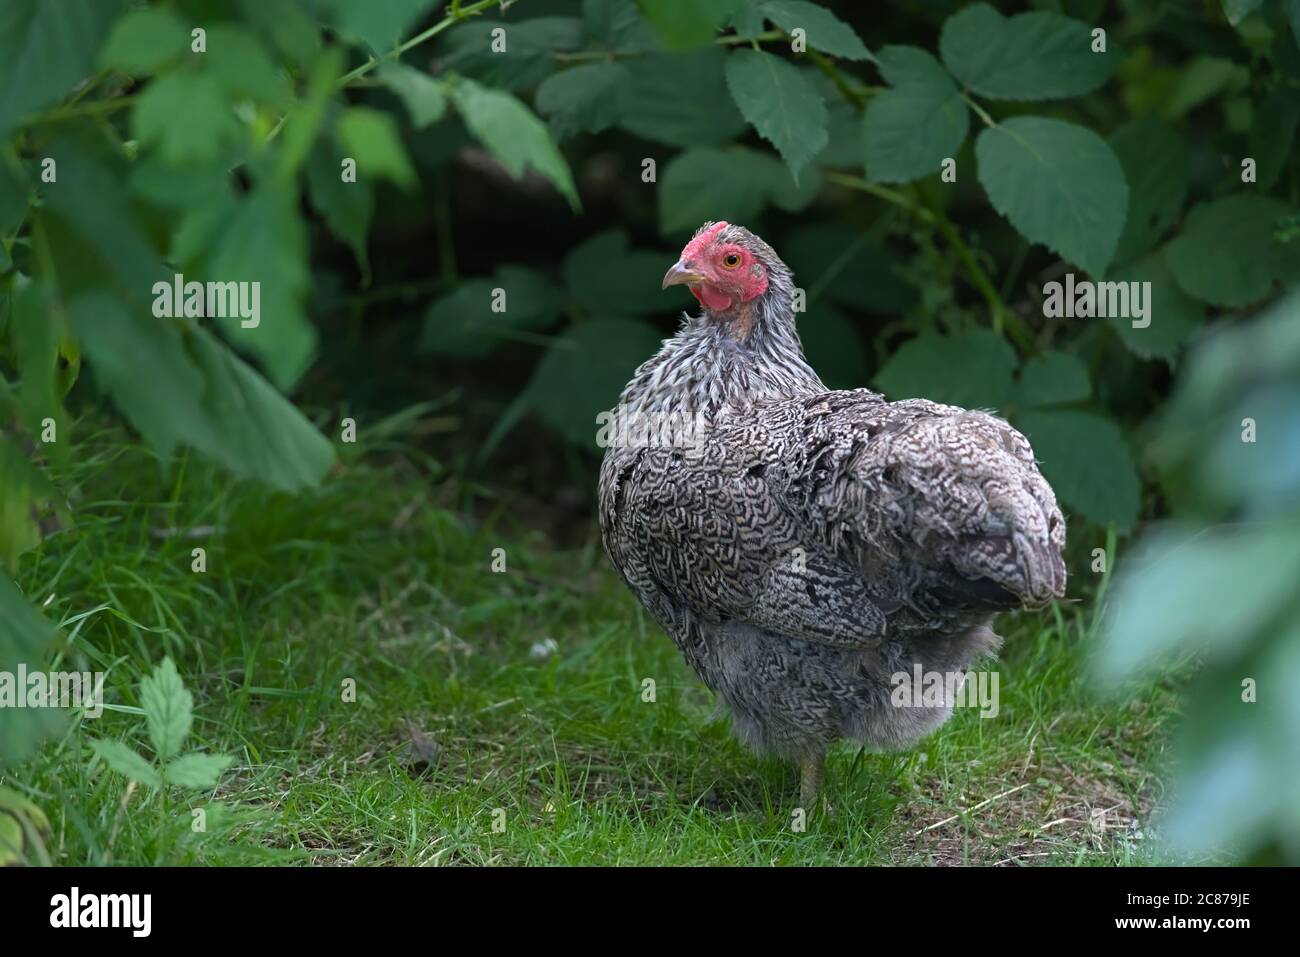 3 - Face naturally lit, this bantam silver pencilled wyandotte pure bred pet chicken is framed by leafy deep greens. Garden rural scene. Stock Photo